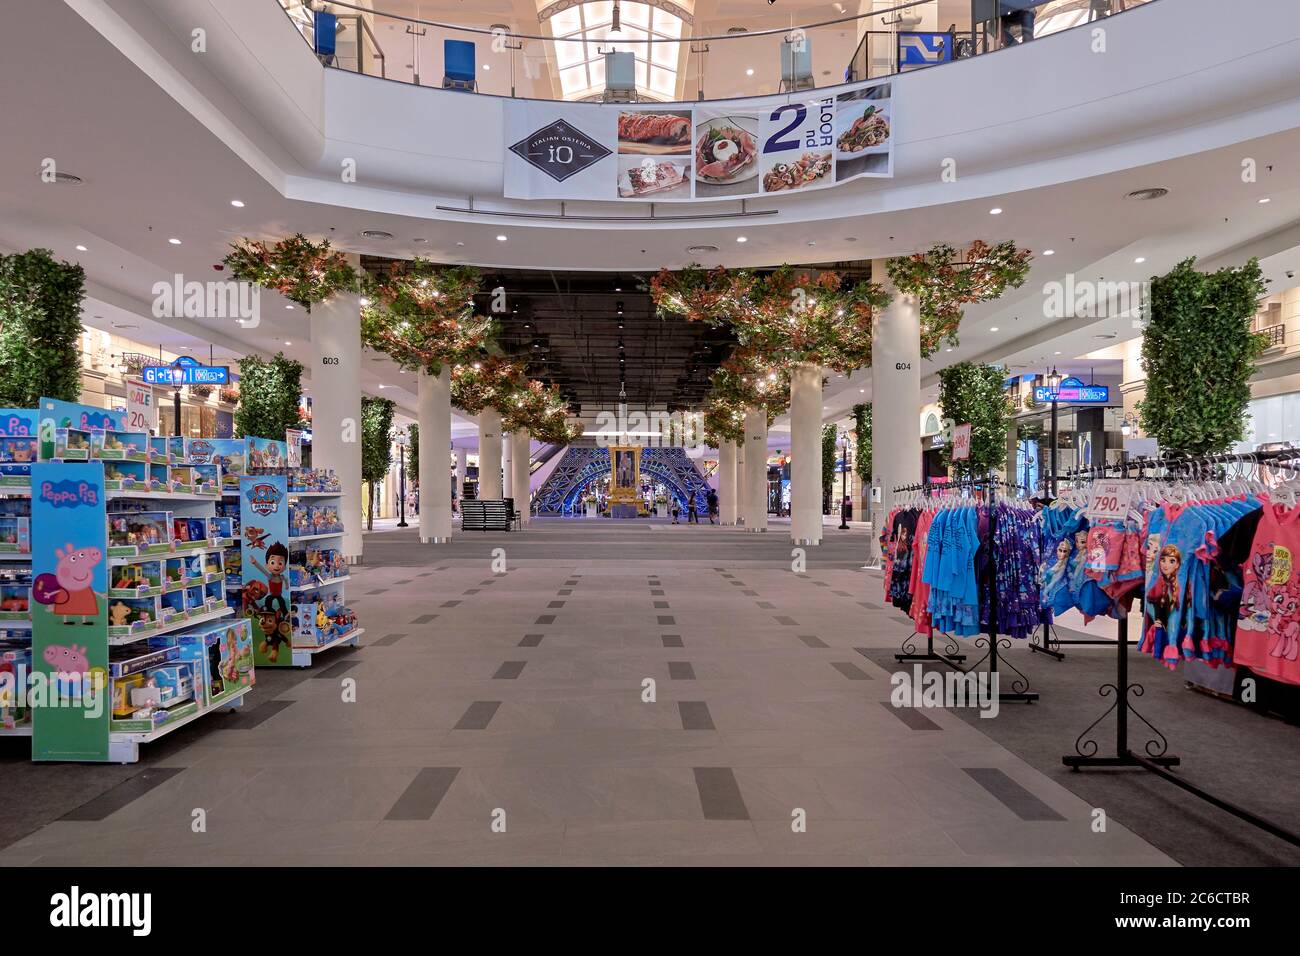 Concept covid 19 business effect with an empty floor devoid of customers at a shopping mall in Thailand Southeast Asia Stock Photo